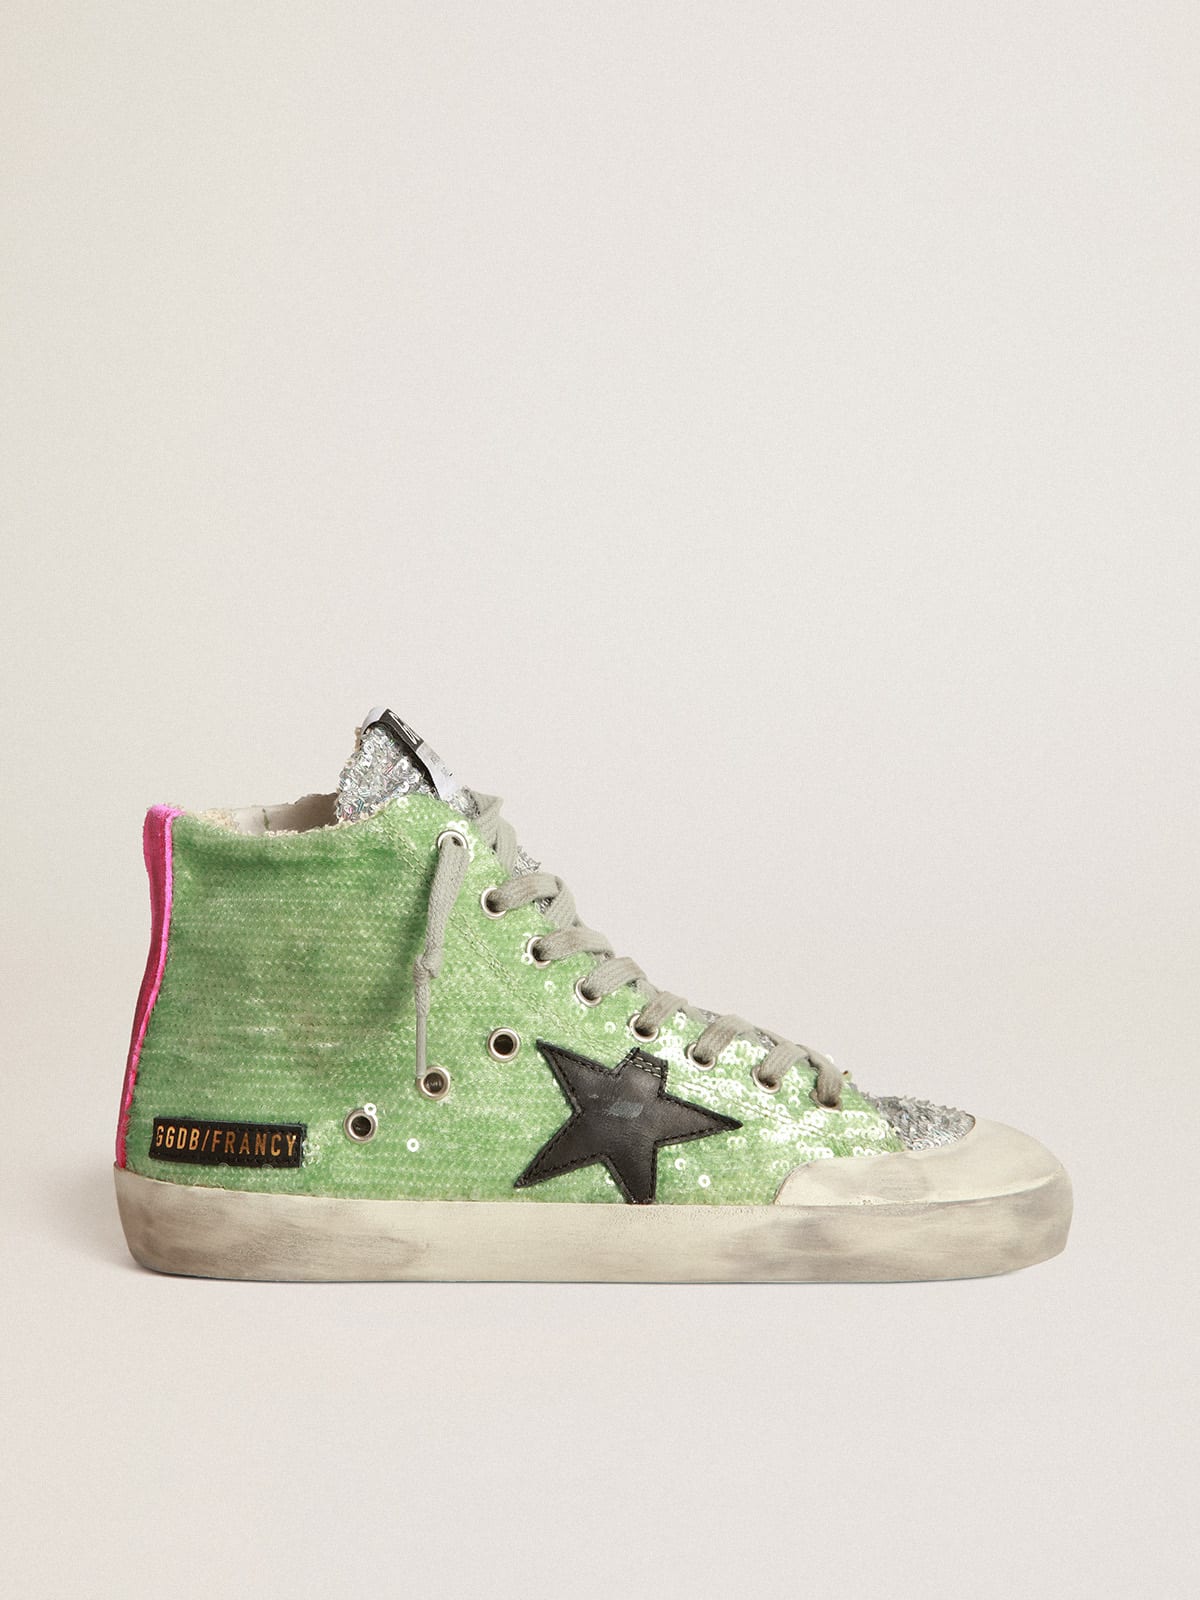 Francy Penstar sneakers in light green sequins with black leather star and  fuchsia suede heel tab | Golden Goose